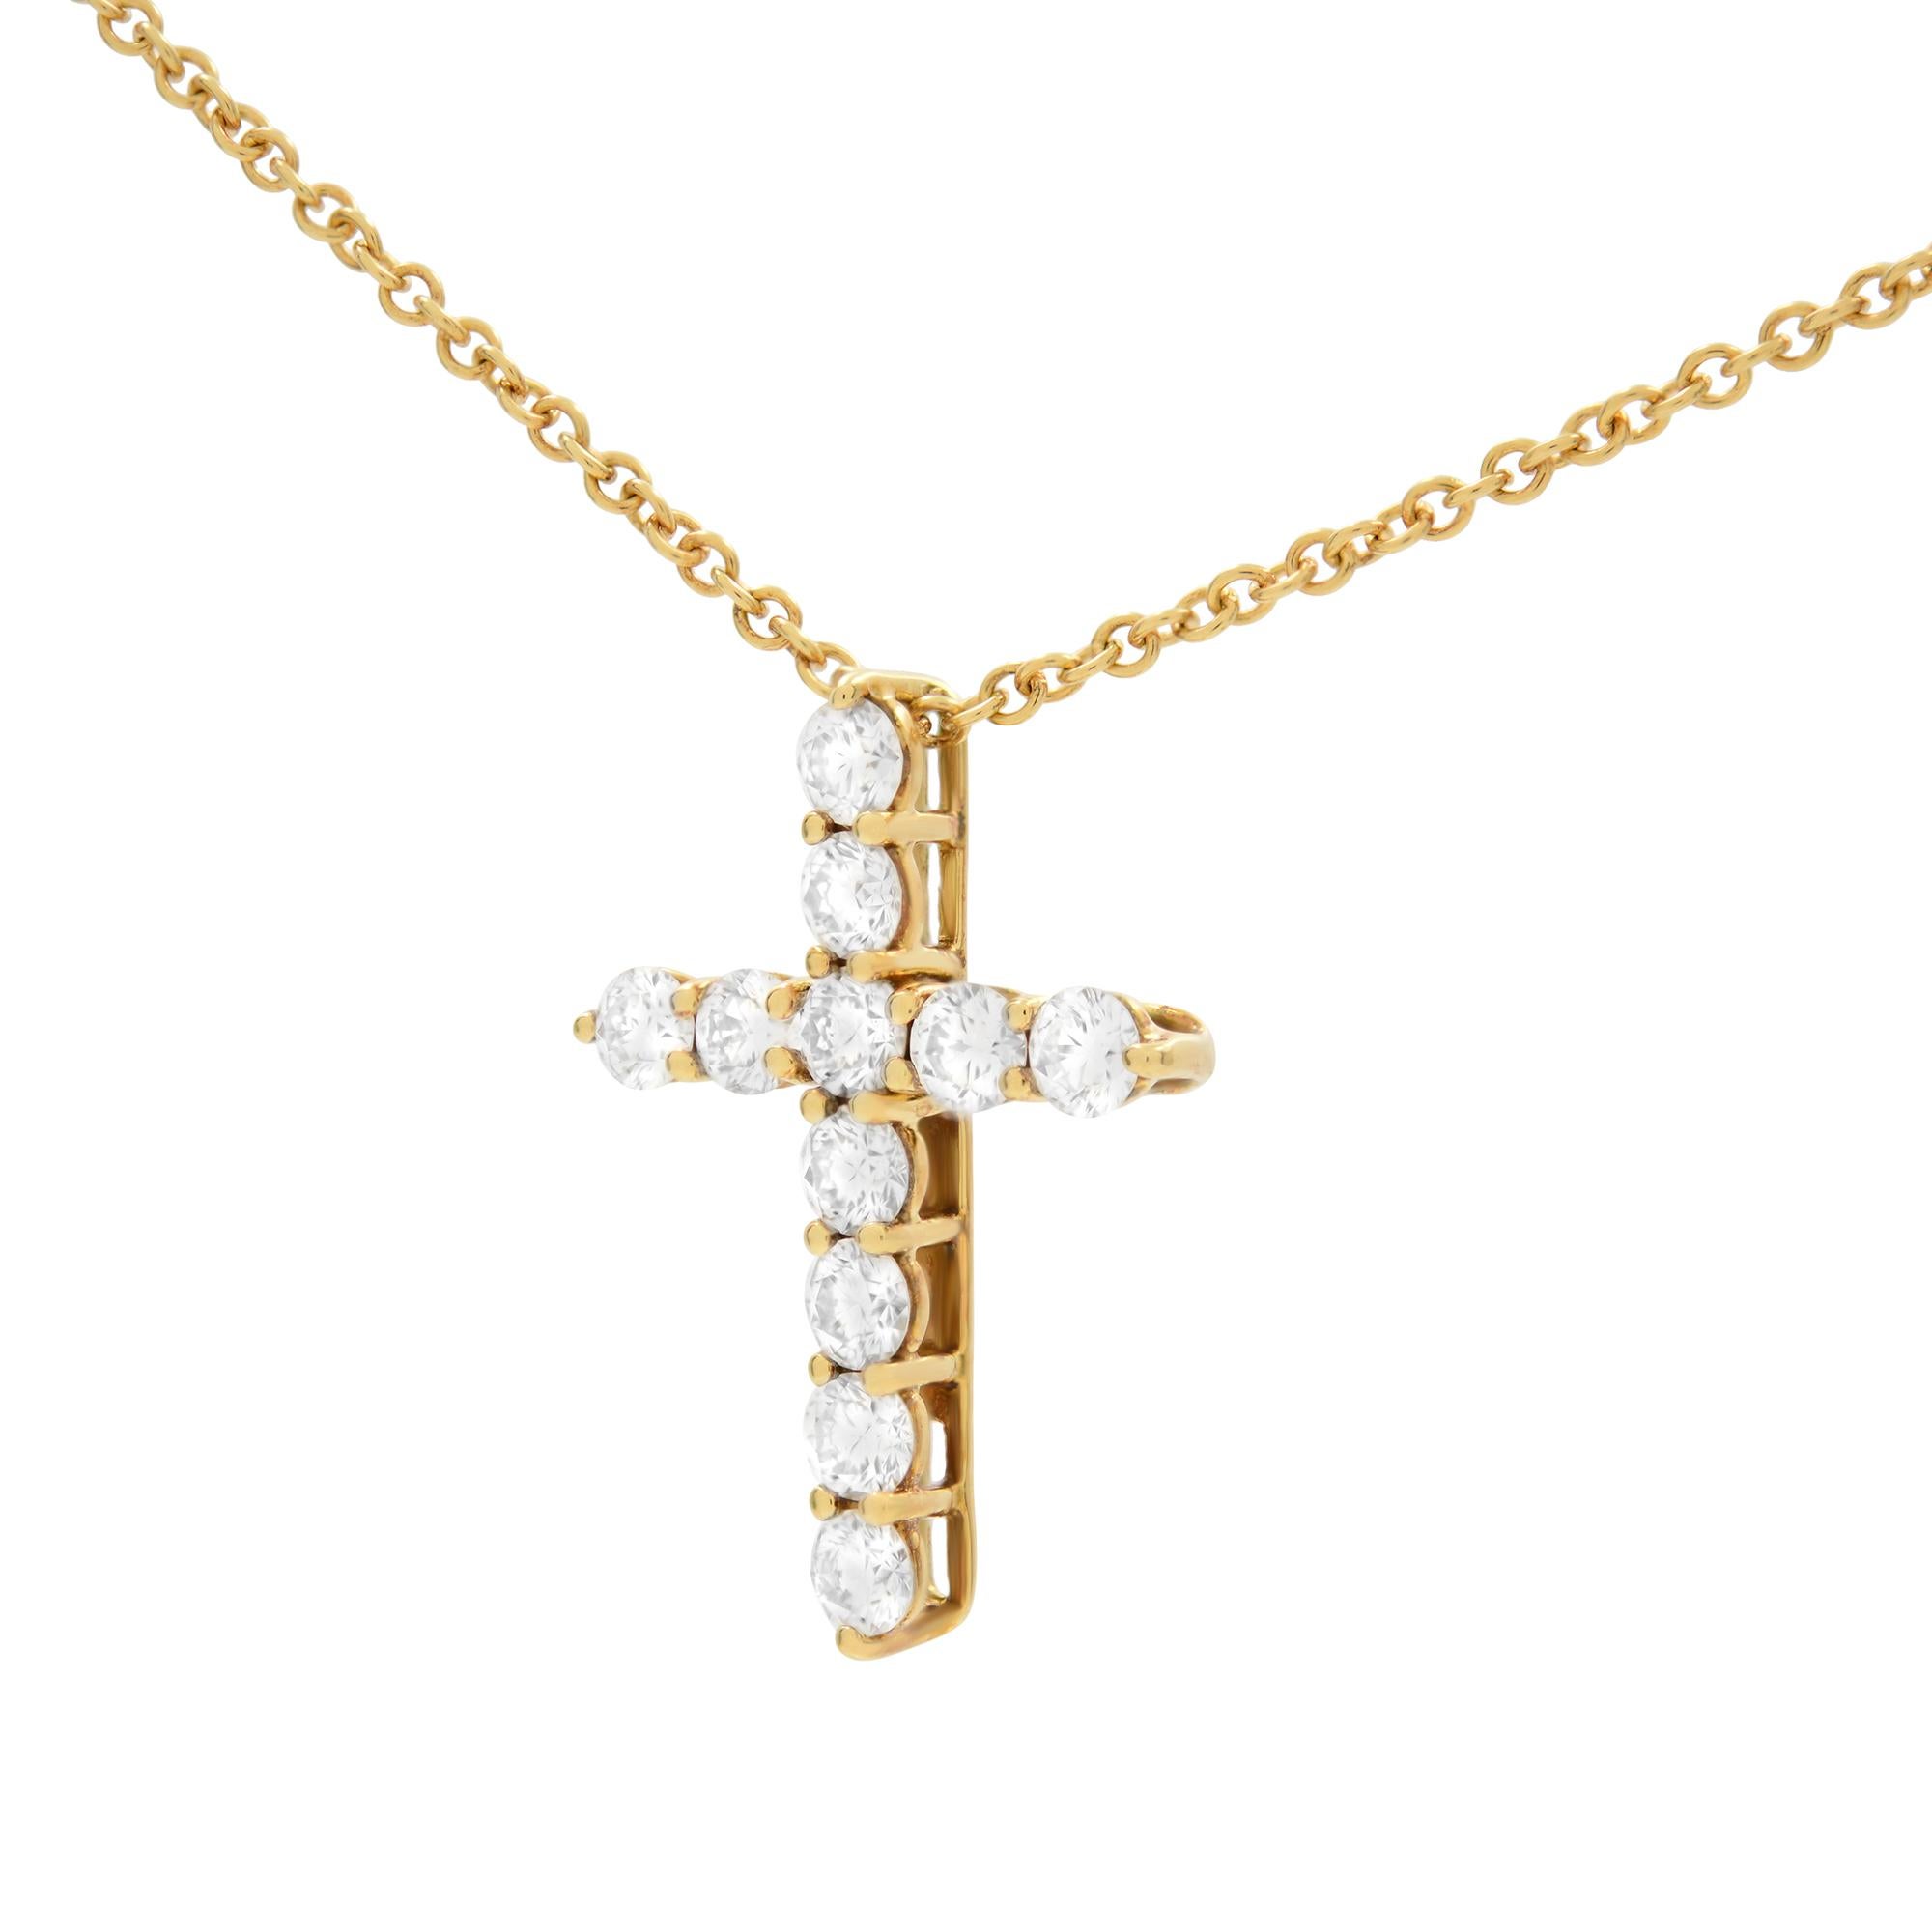 18K yellow gold diamond cross pendant from Tiffany & Co. The cross is prong set with 11 round cut diamonds. Total carat weight 0.42. Cross size: 17mm x 12 mm. Thickness: 3.00 mm. Chain Length: 16 inches. Excellent pre-owned condition. Comes with